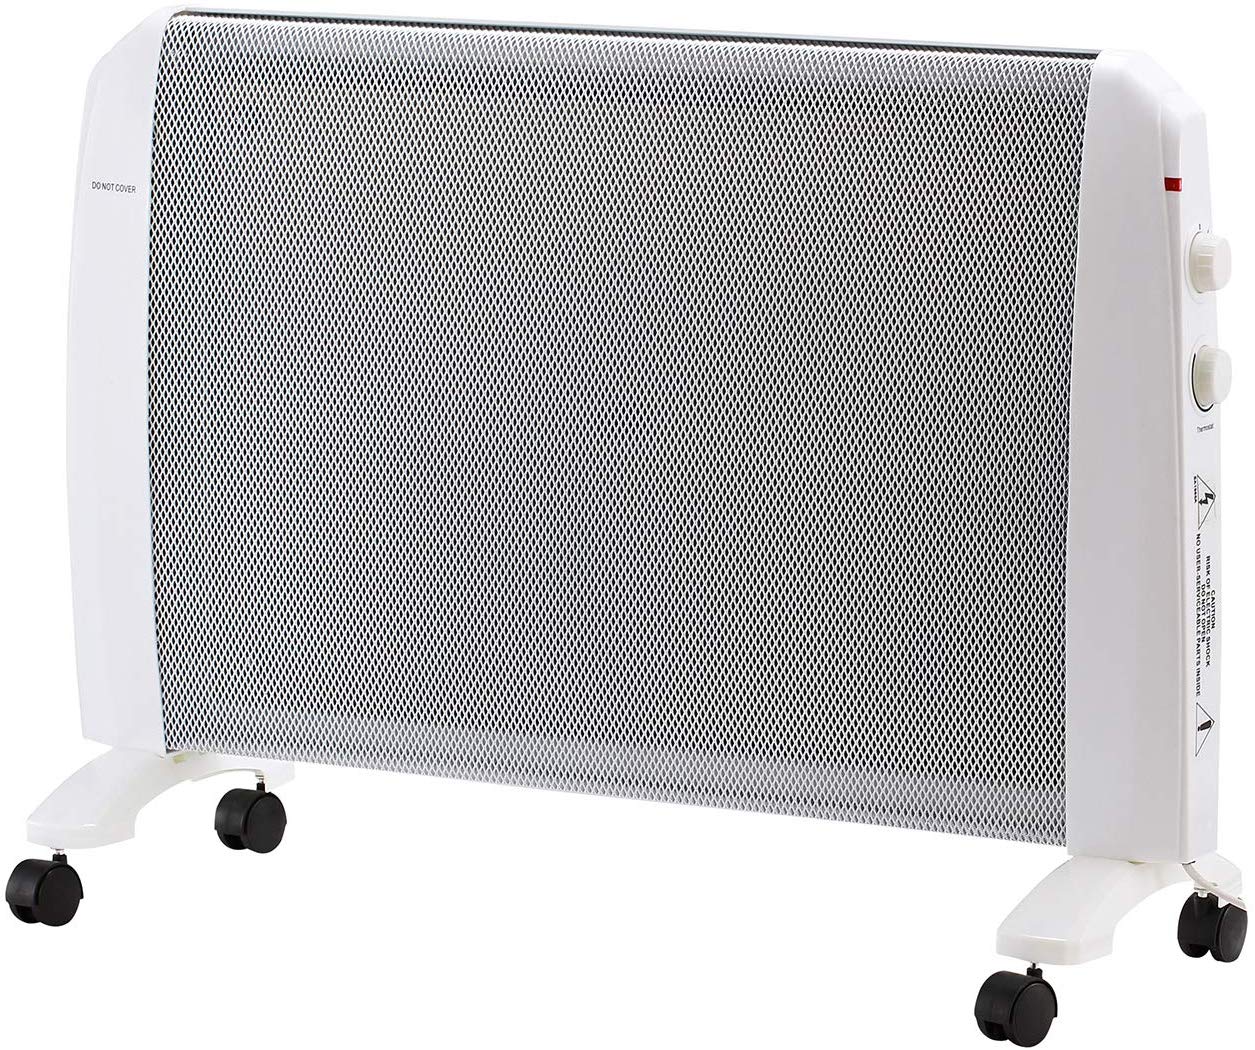 a convector space heater